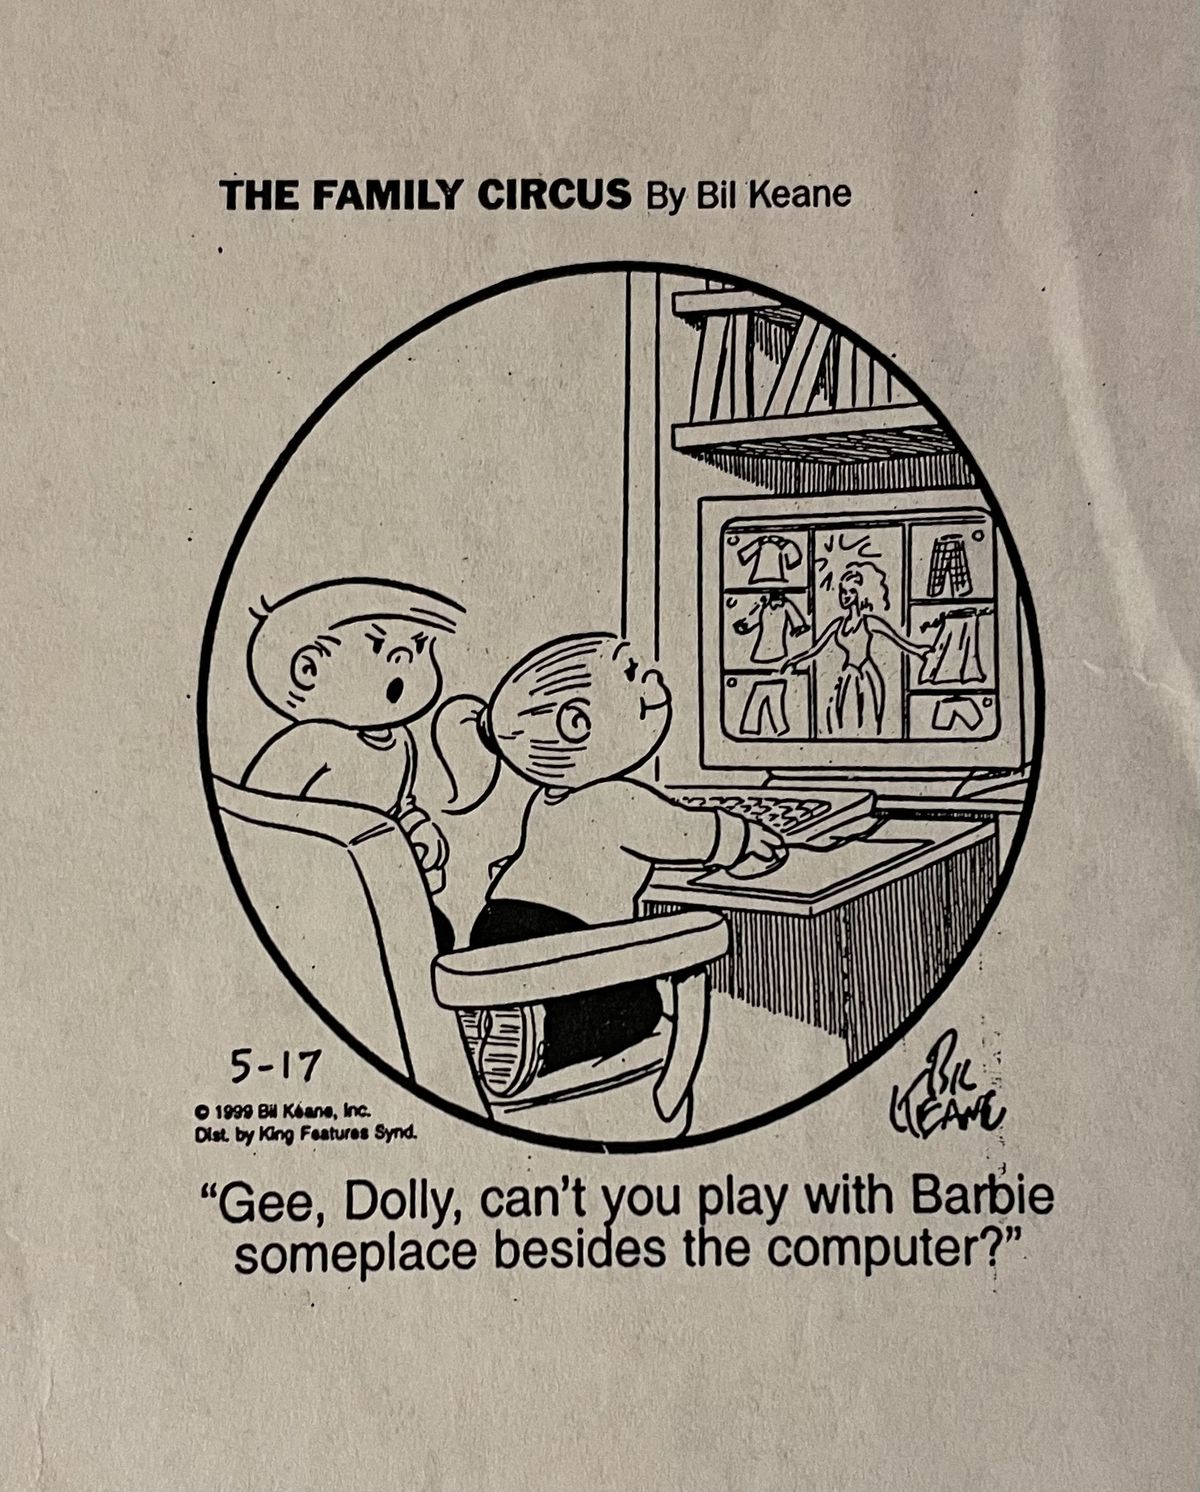 A clipping of the comic The Family Circus. A little girl plays the game on a desktop computer, and an angry-looking young boy asks, “Gee, Dolly, can’t you play with Barbie someplace besides the computer?”